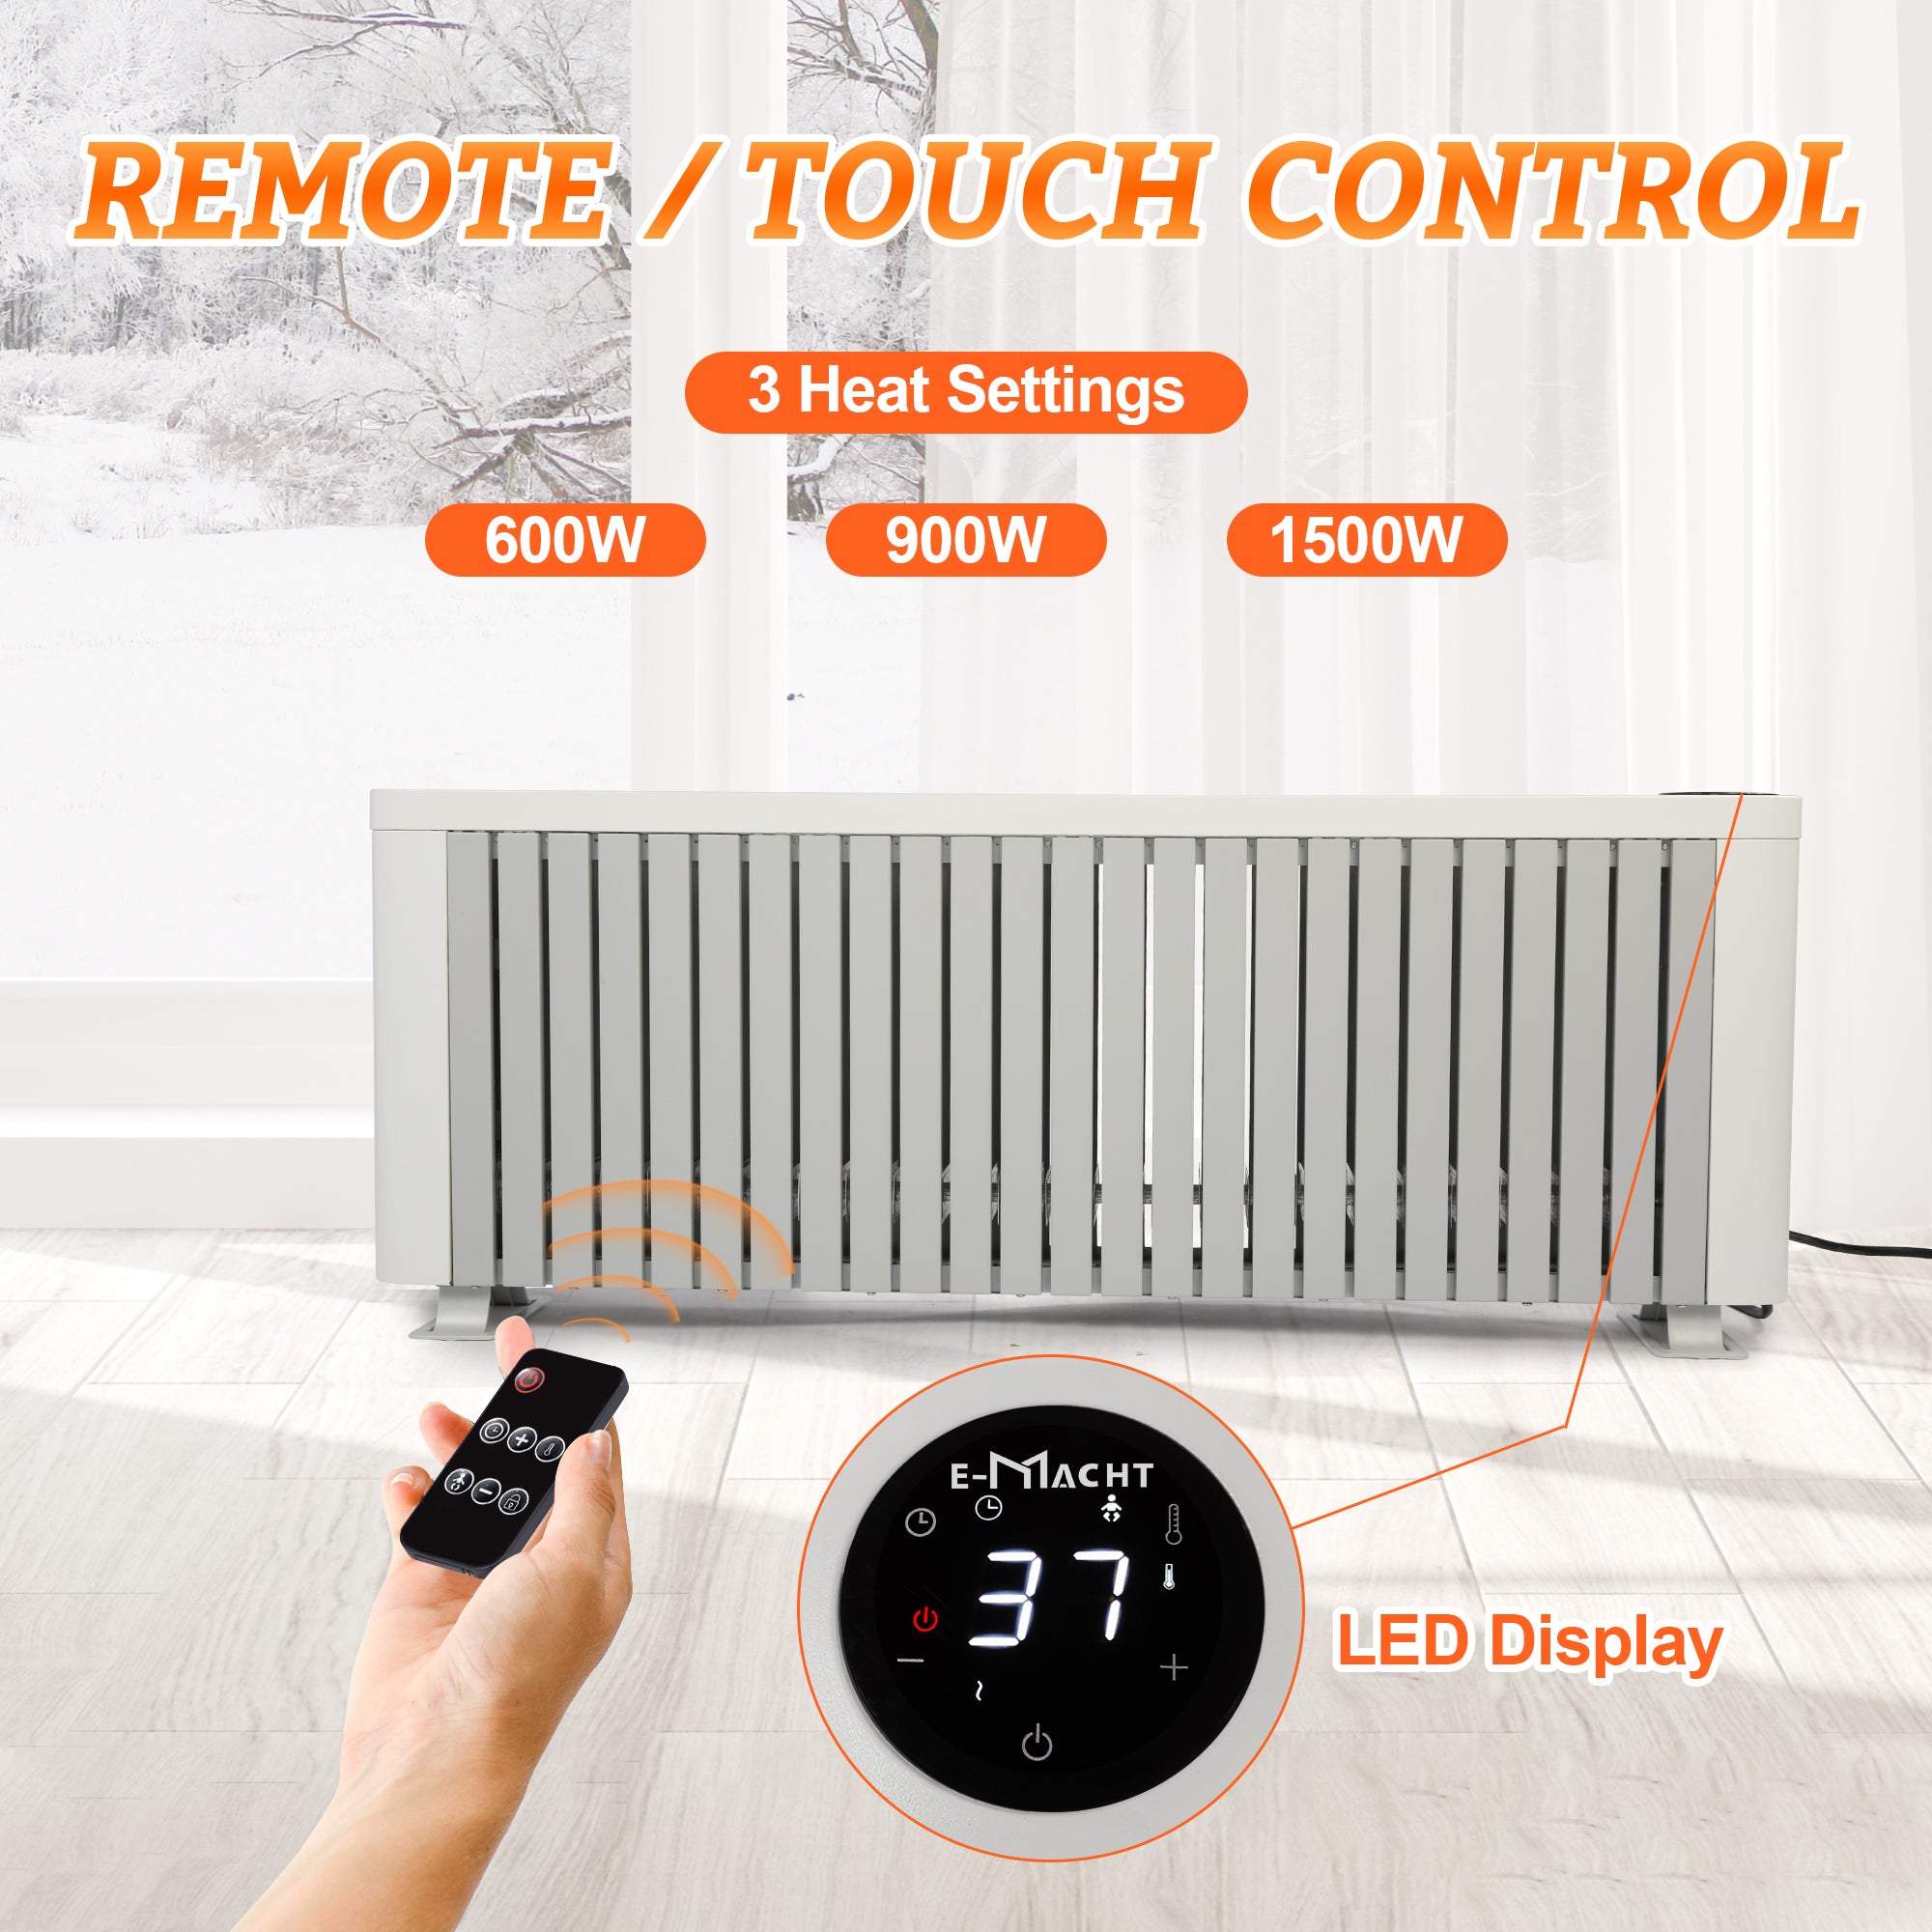 Efficient 1500W Baseboard Electric Heater, Silent Convection Heating, Remote Lock, LED Display, Multi-Protection